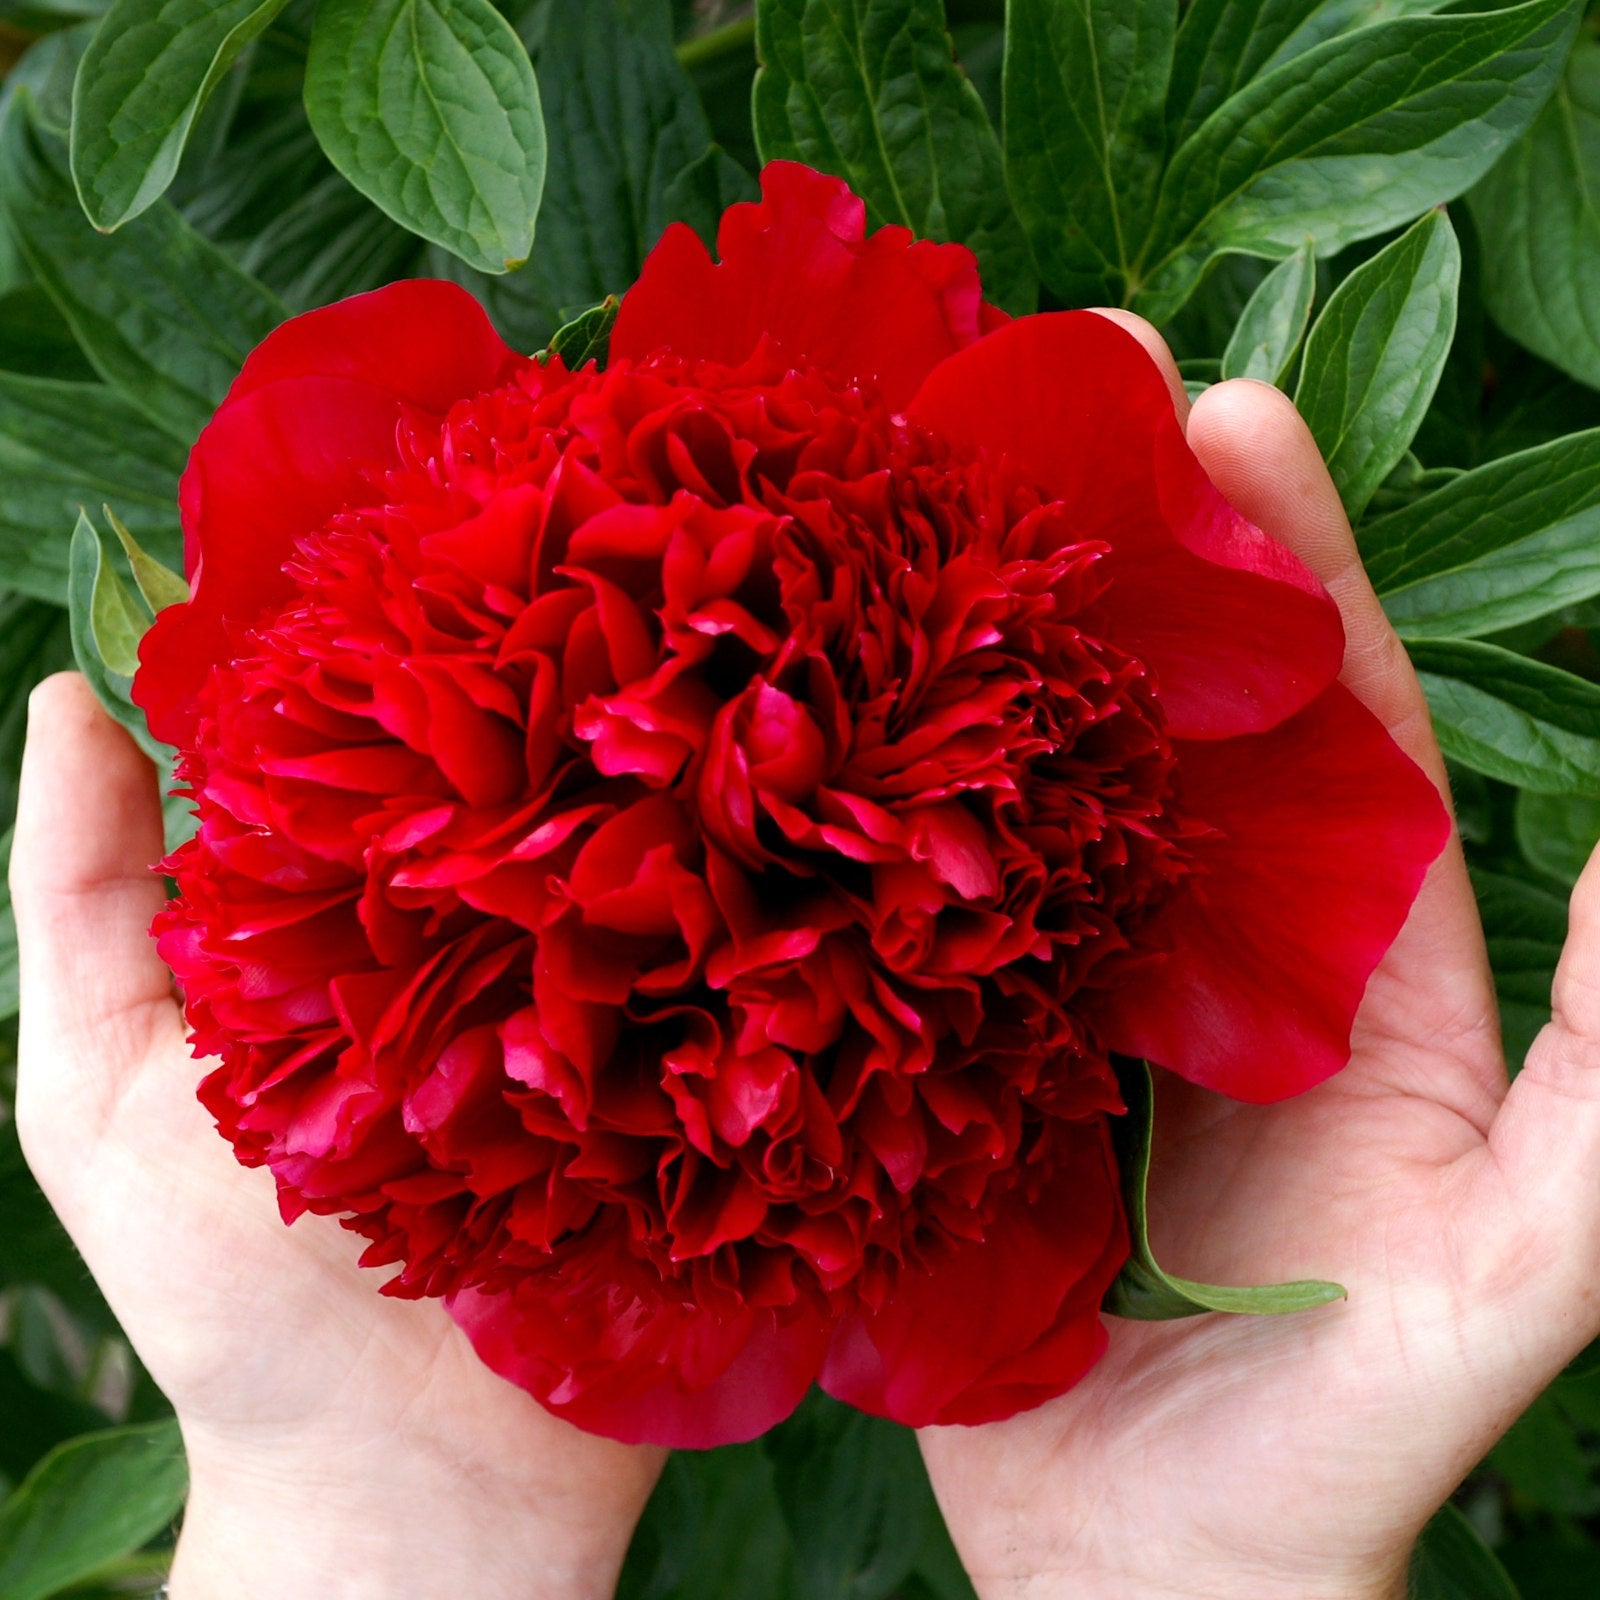 True Red Peony Bulbs For Sale Online | Red Charm (Fragrant) – Easy To Grow  Bulbs